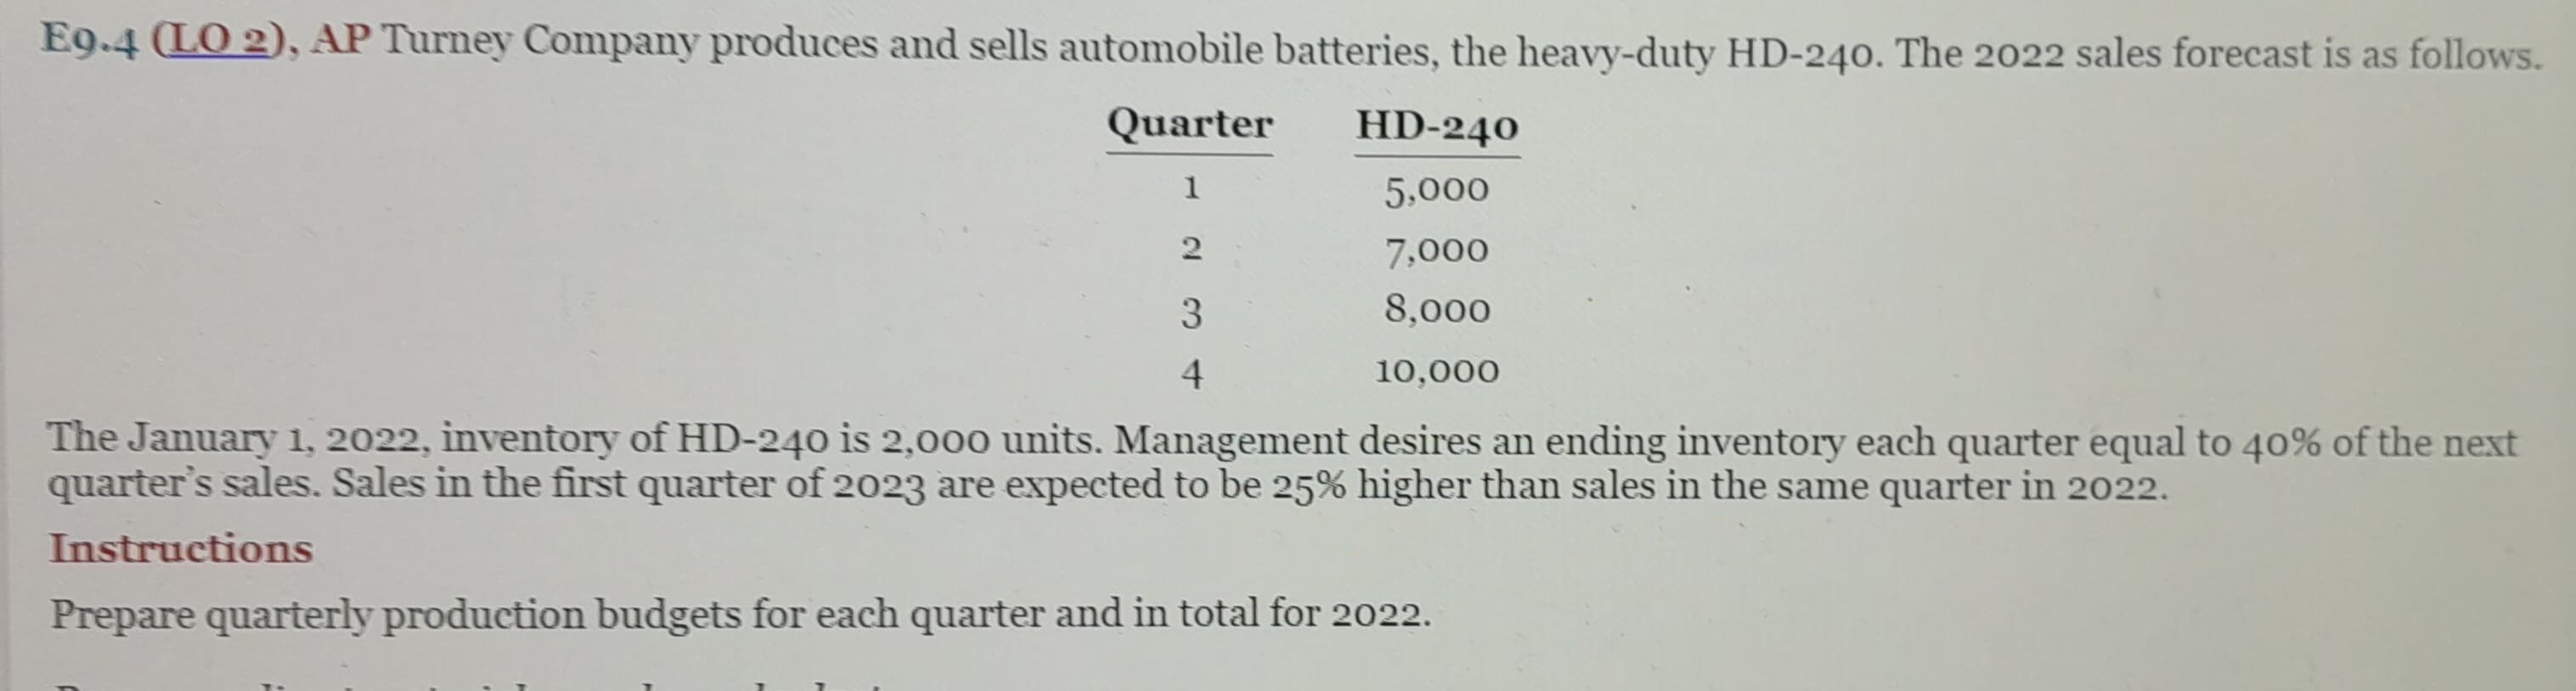 E9.4 (LO 2), AP Turney Company produces and sells automobile batteries, the heavy-duty HD-240. The 2022 sales forecast is as follows.
Quarter HD-240
1
5,000
7,000
8,000
10,000
The January 1, 2022, inventory of HD-240 is 2,000 units. Management desires an ending inventory each quarter equal to 40% of the next
quarter's sales. Sales in the first quarter of 2023 are expected to be 25% higher than sales in the same quarter in 2022.
Instructions
23
3
4
Prepare quarterly production budgets for each quarter and in total for 2022.